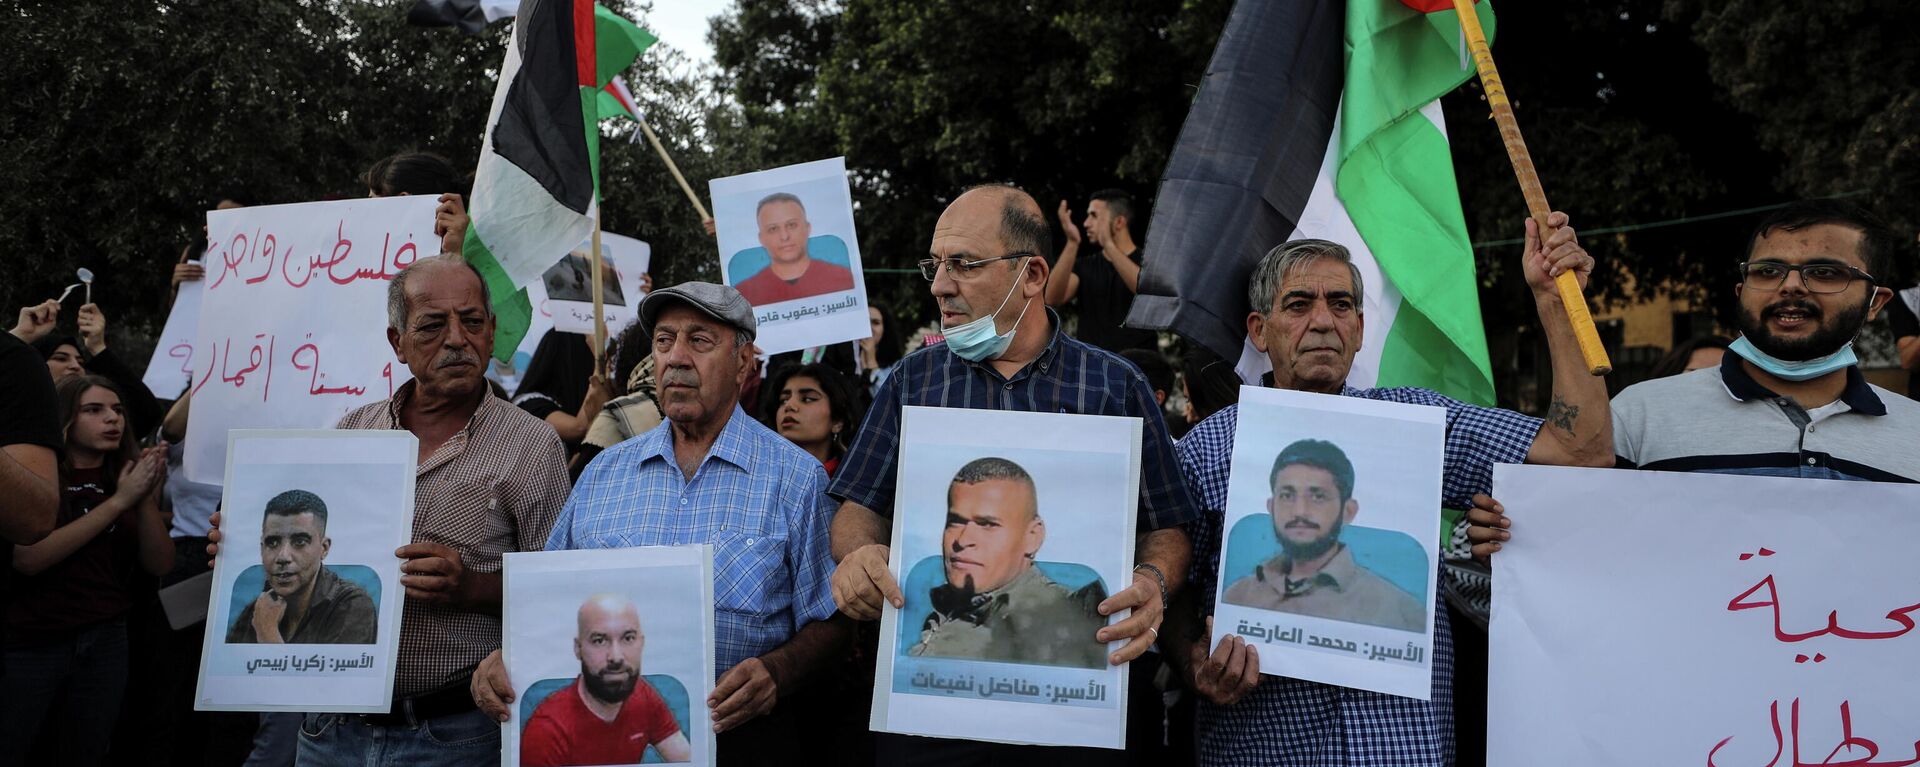 People take part in a protest as they support the six Palestinian militants men who had escaped from Gilboa prison earlier this week in Nazareth, Israel September 11, 2021. - Sputnik International, 1920, 11.09.2021